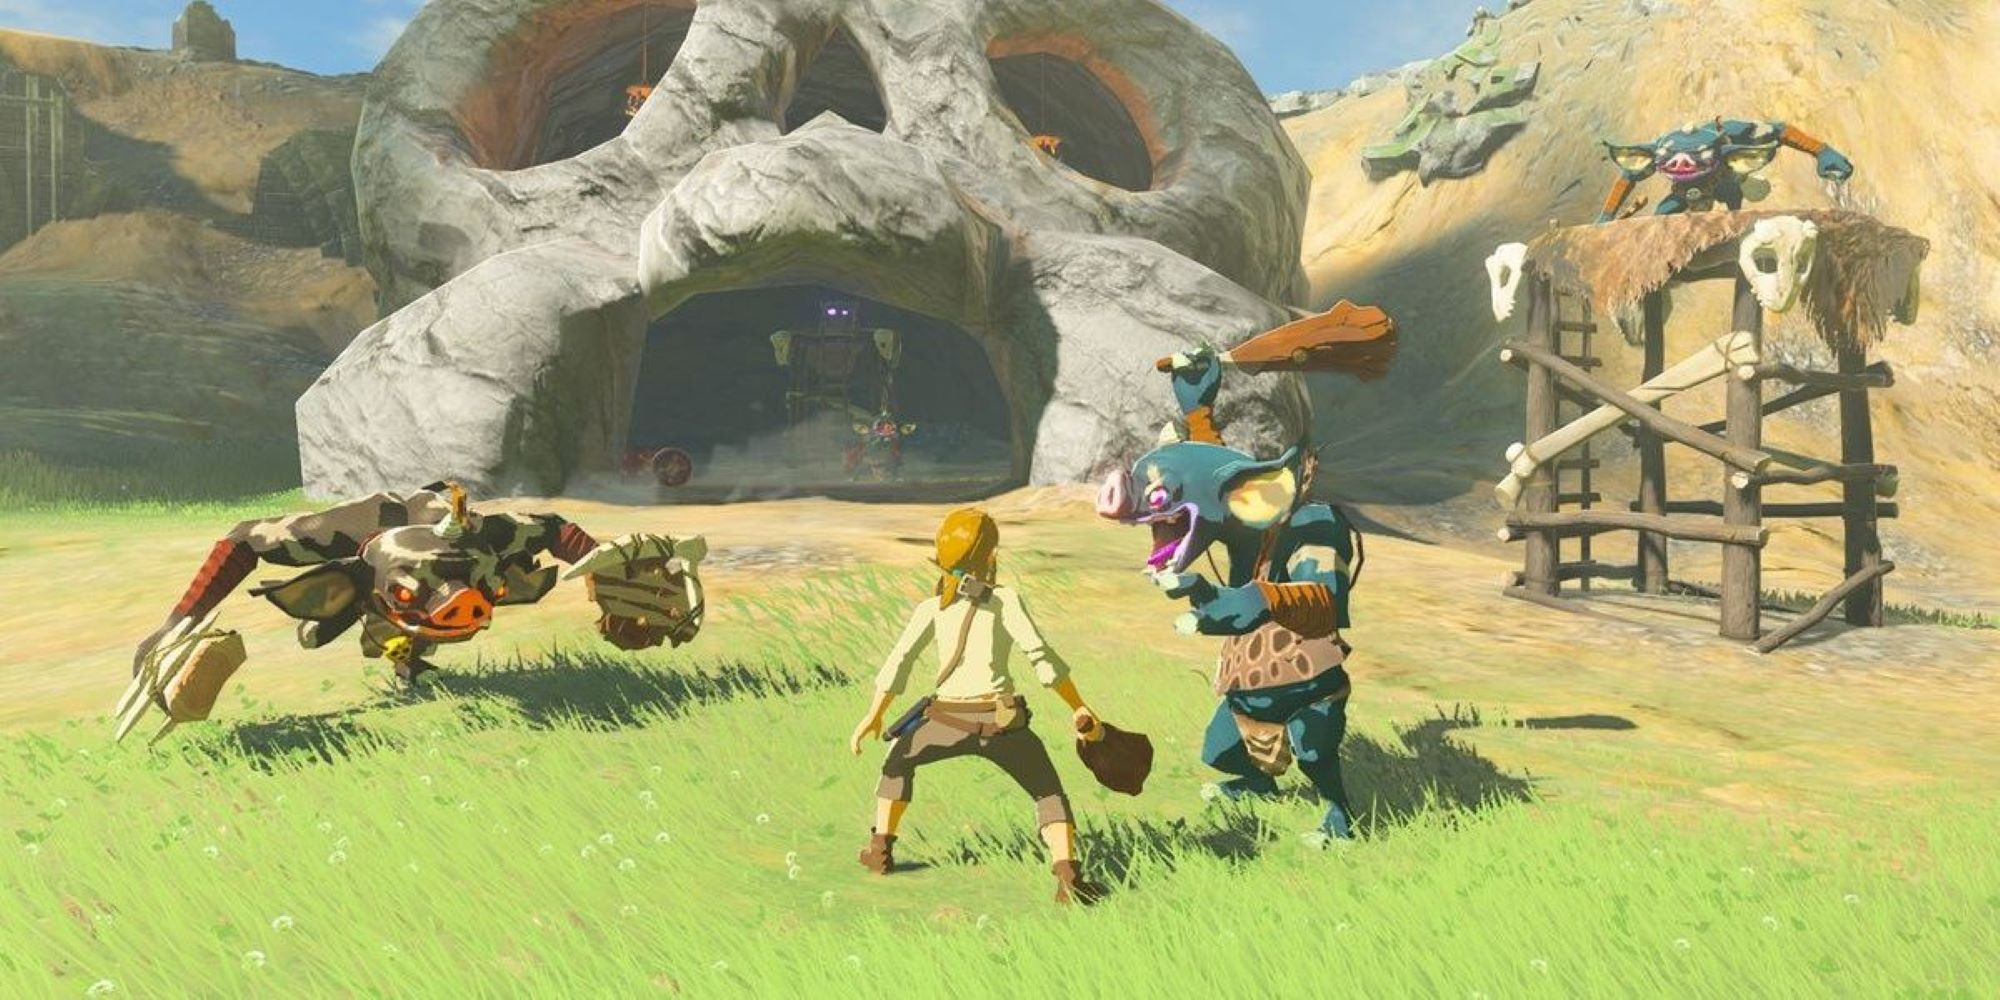 Breath of the Wild Moblins Attacking Link